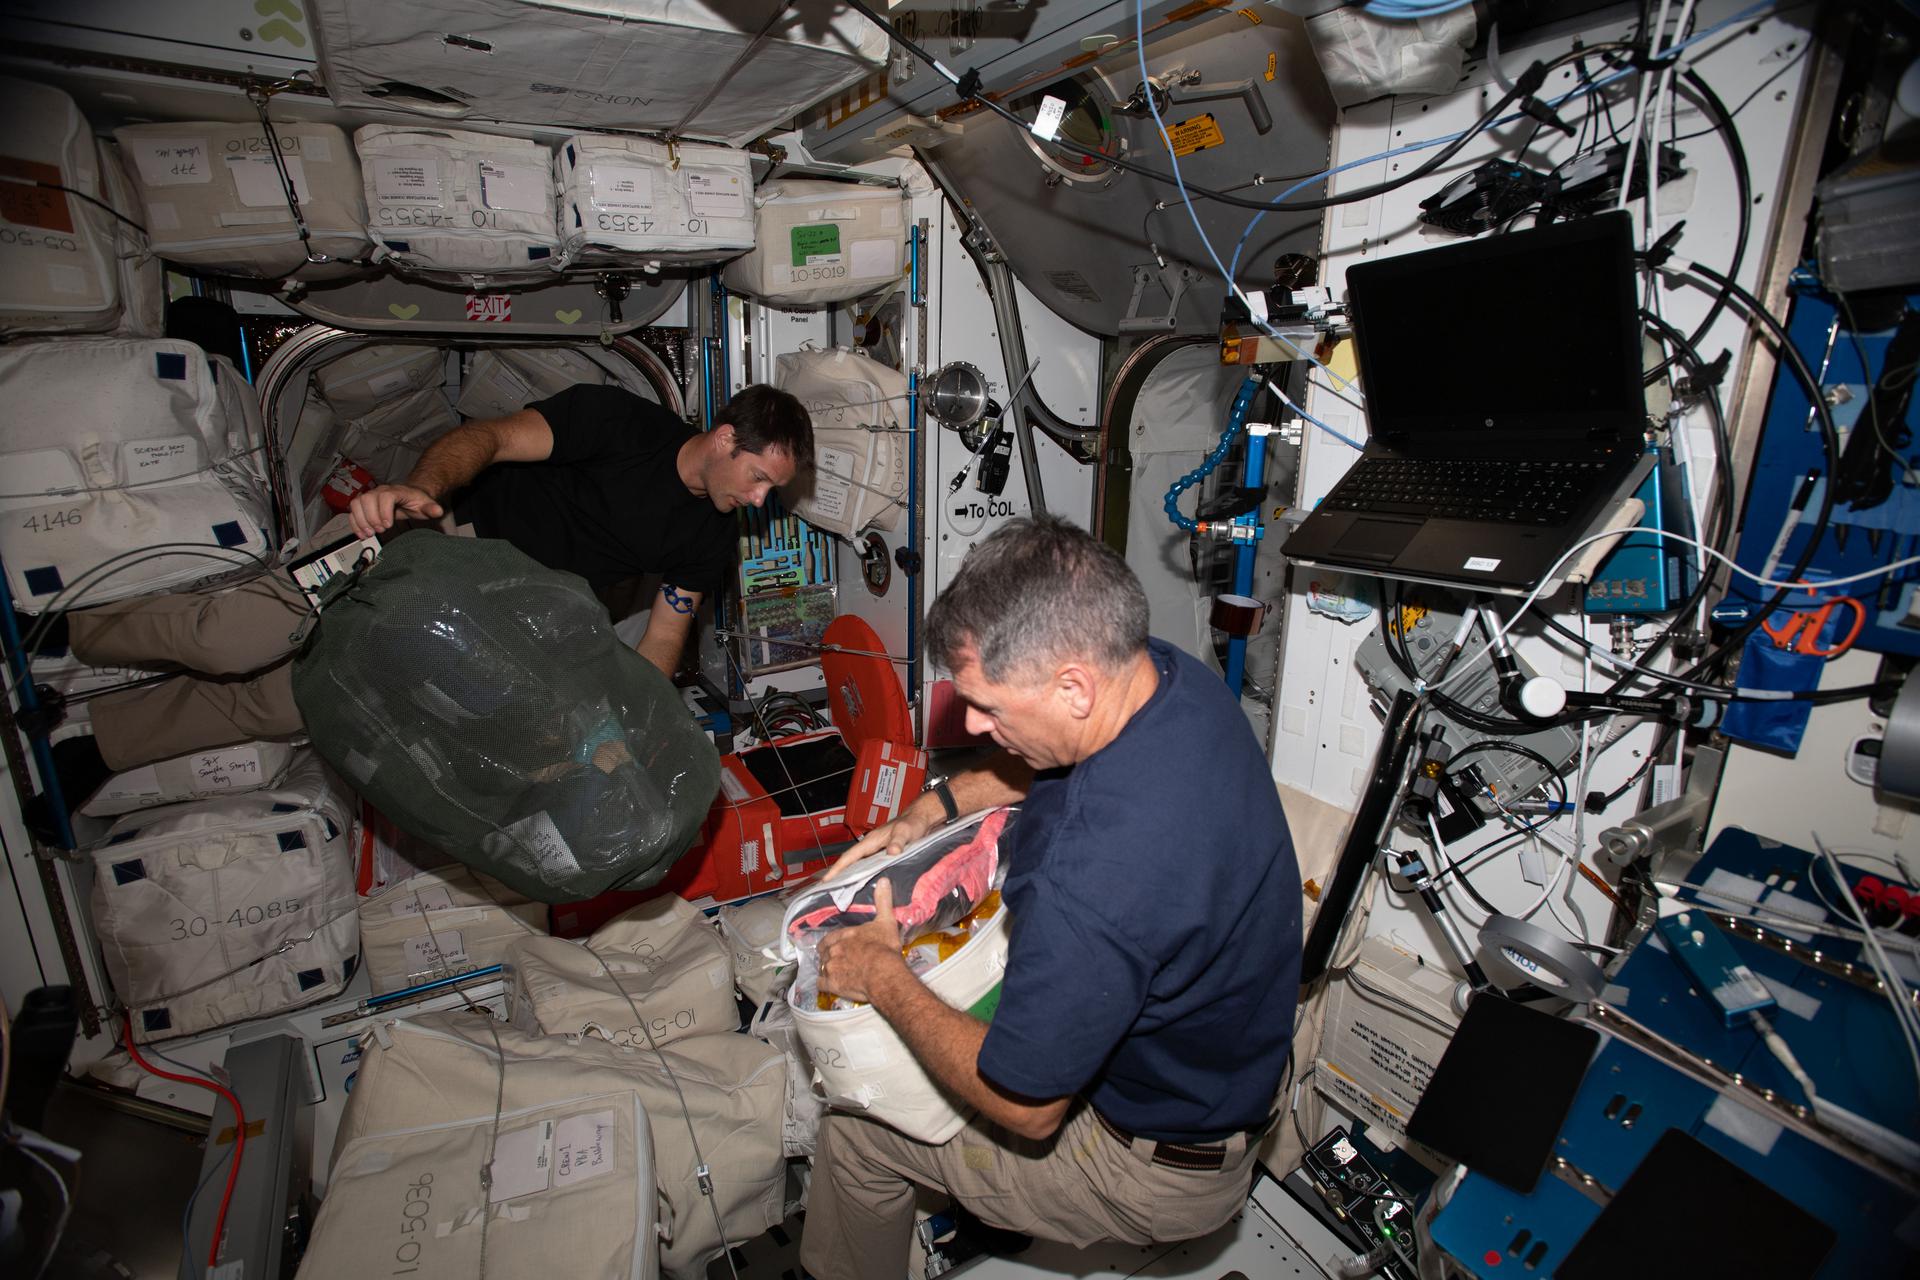 Expedition 65 Flight Engineers (from left) Thomas Pesquet of ESA (European Space Agency) and Shane Kimbrough of NASA gather and prepack cargo to be returned to Earth on the next SpaceX Cargo Dragon mission targeted for launch on June 3, 2021.